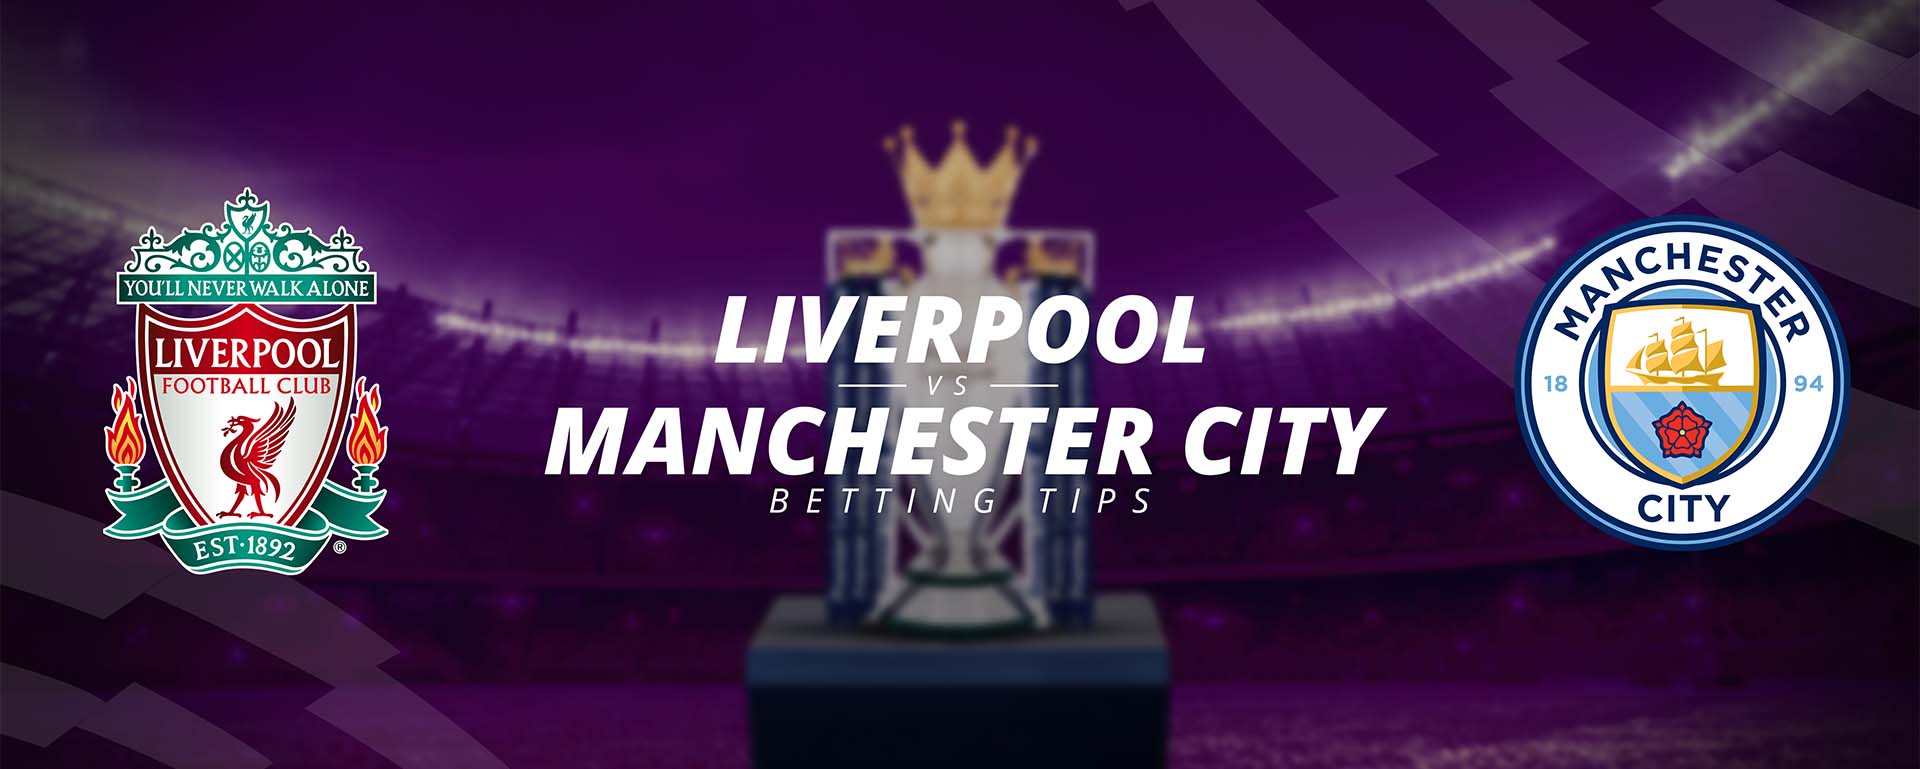 LIVERPOOL VS MANCHESTER CITY: BETTING TIPS